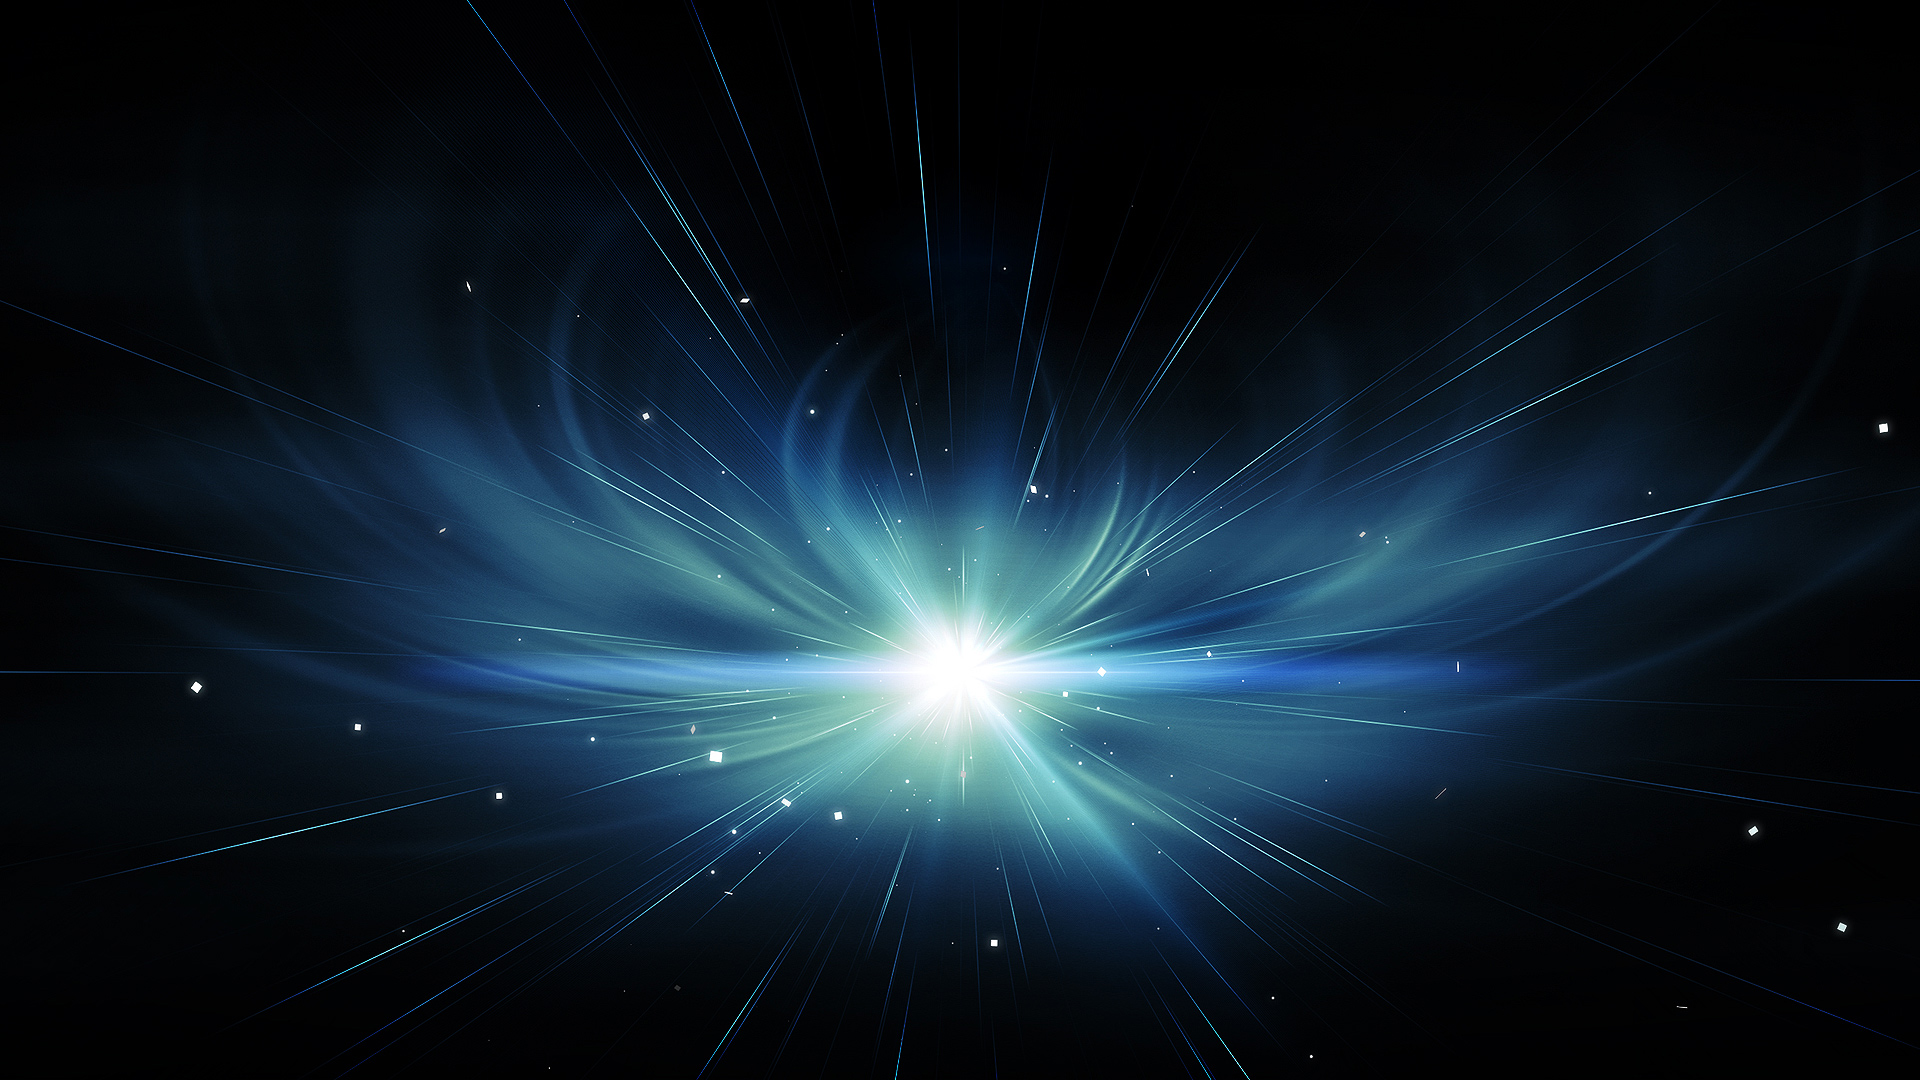 You are viewing the Abstract wallpaper named Navigating Dark Blue HD